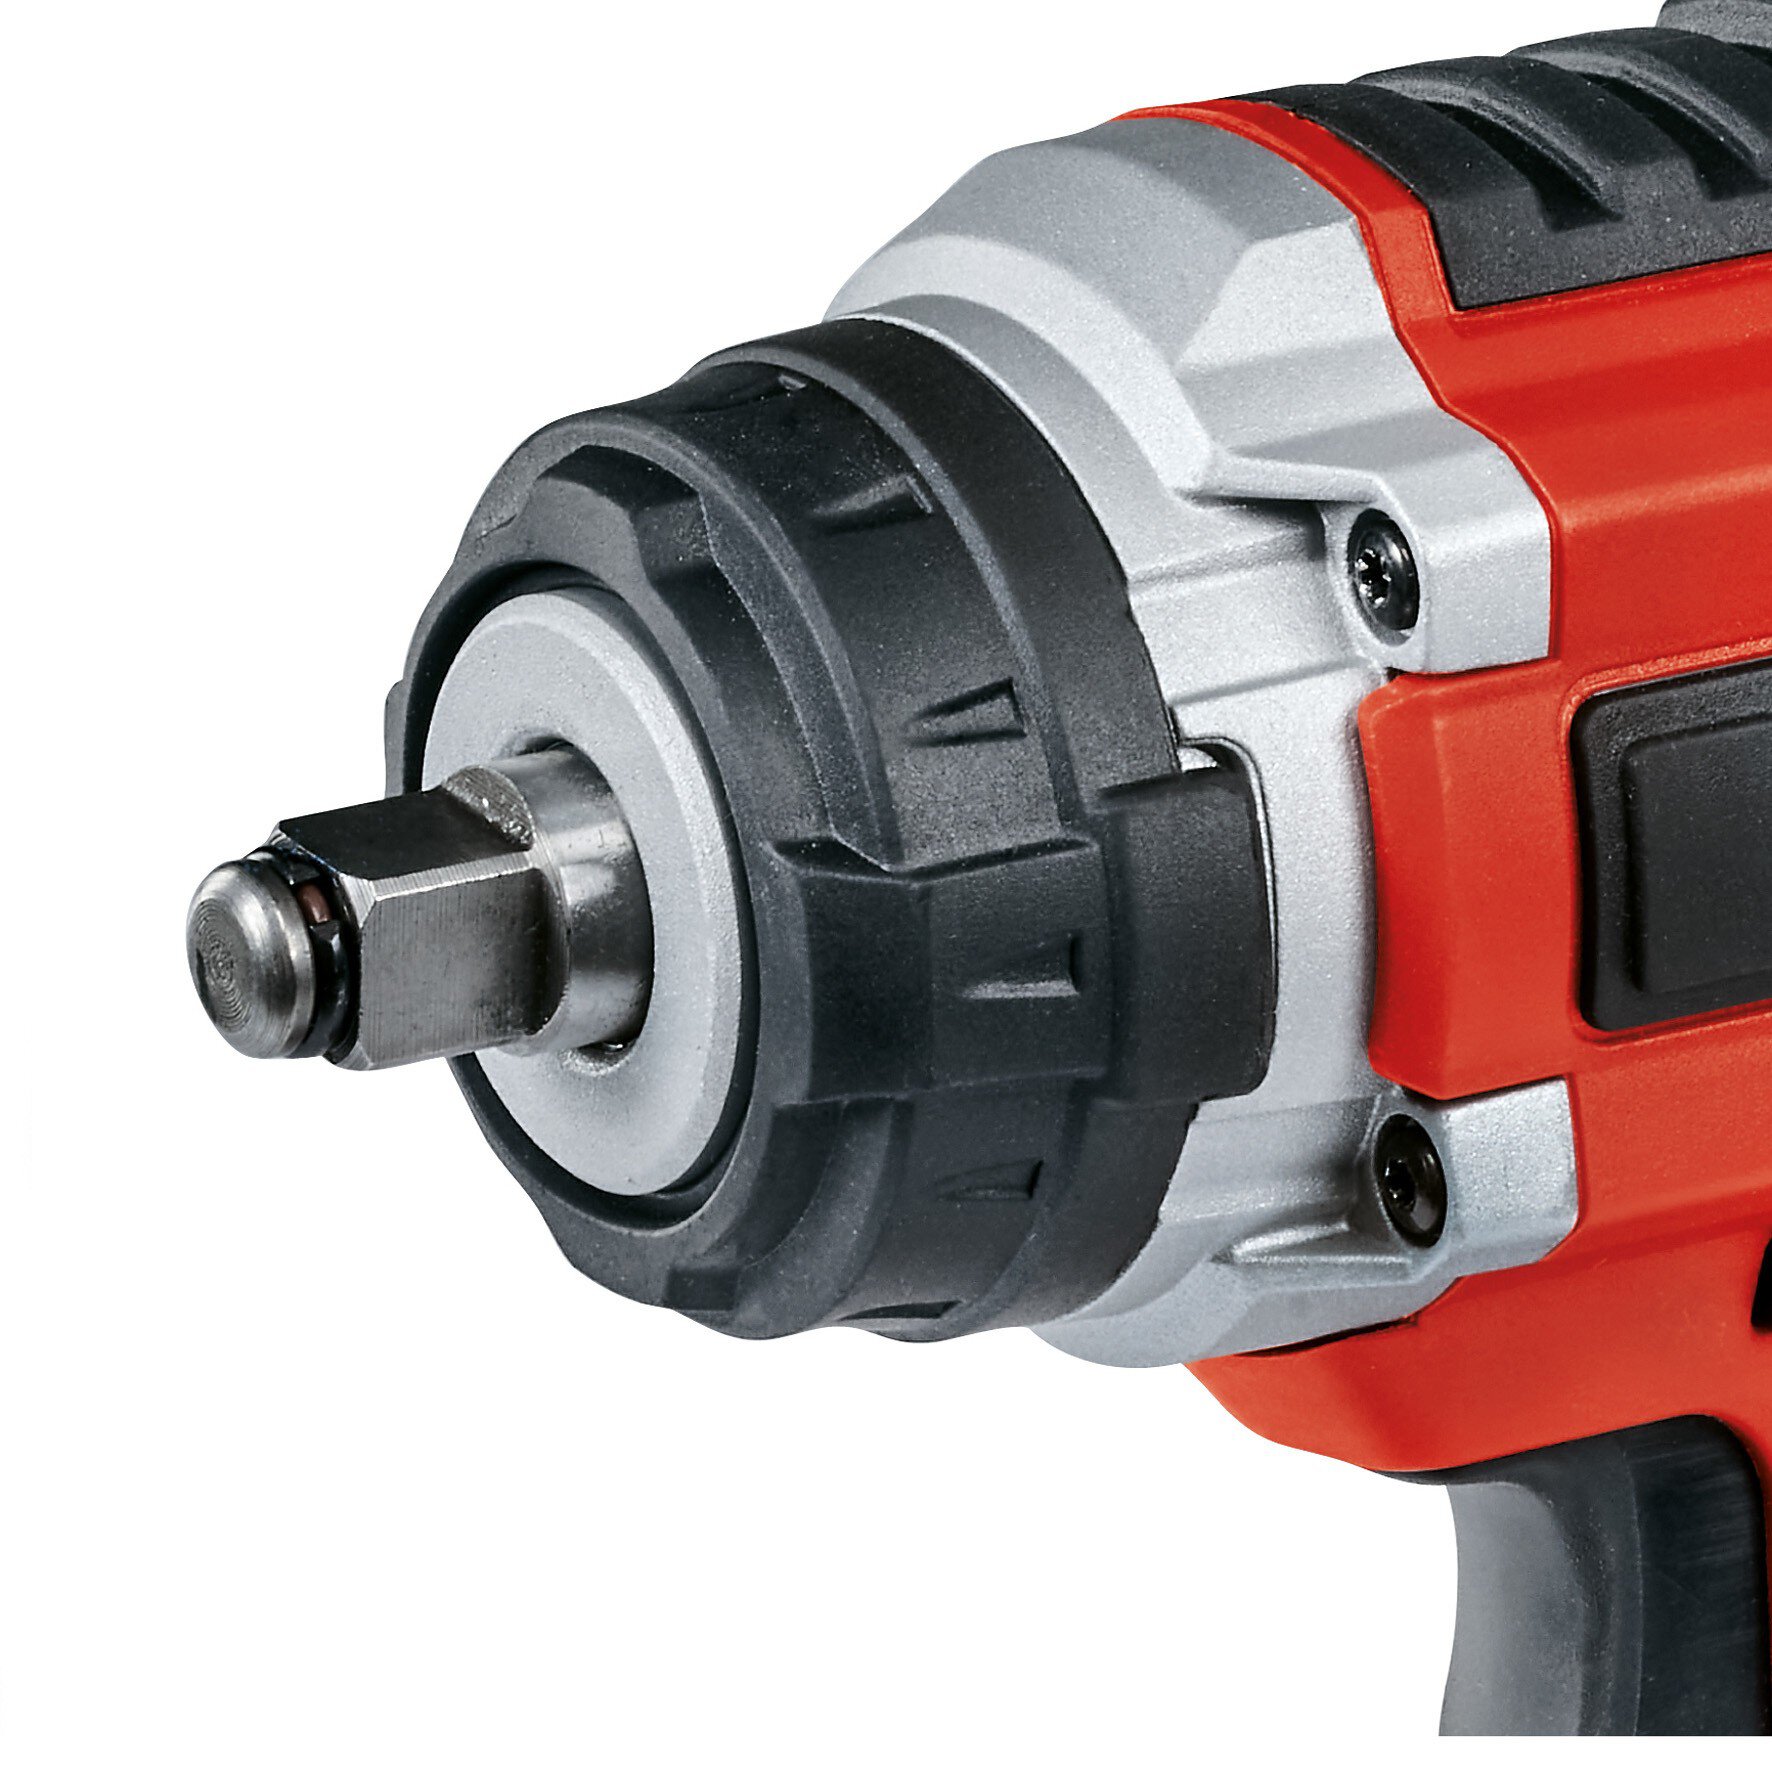 einhell-professional-cordless-impact-wrench-4510070-detail_image-003